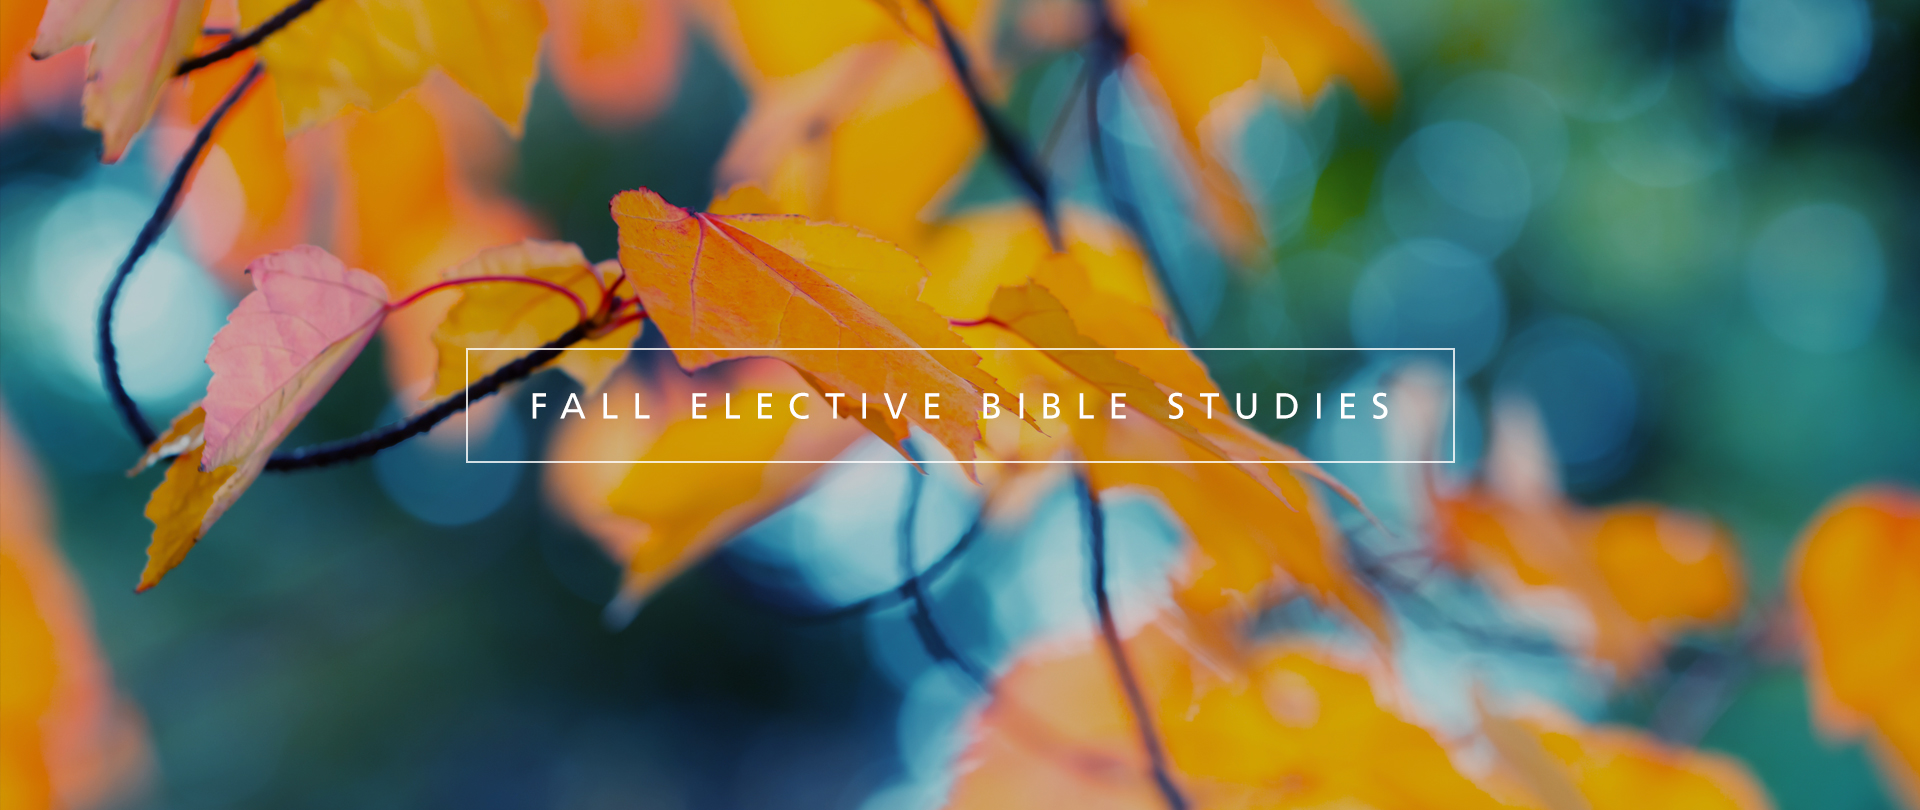 Bible Study Electives
Wednesdays, 6:30–8:00 PM
Register now for Module 2
